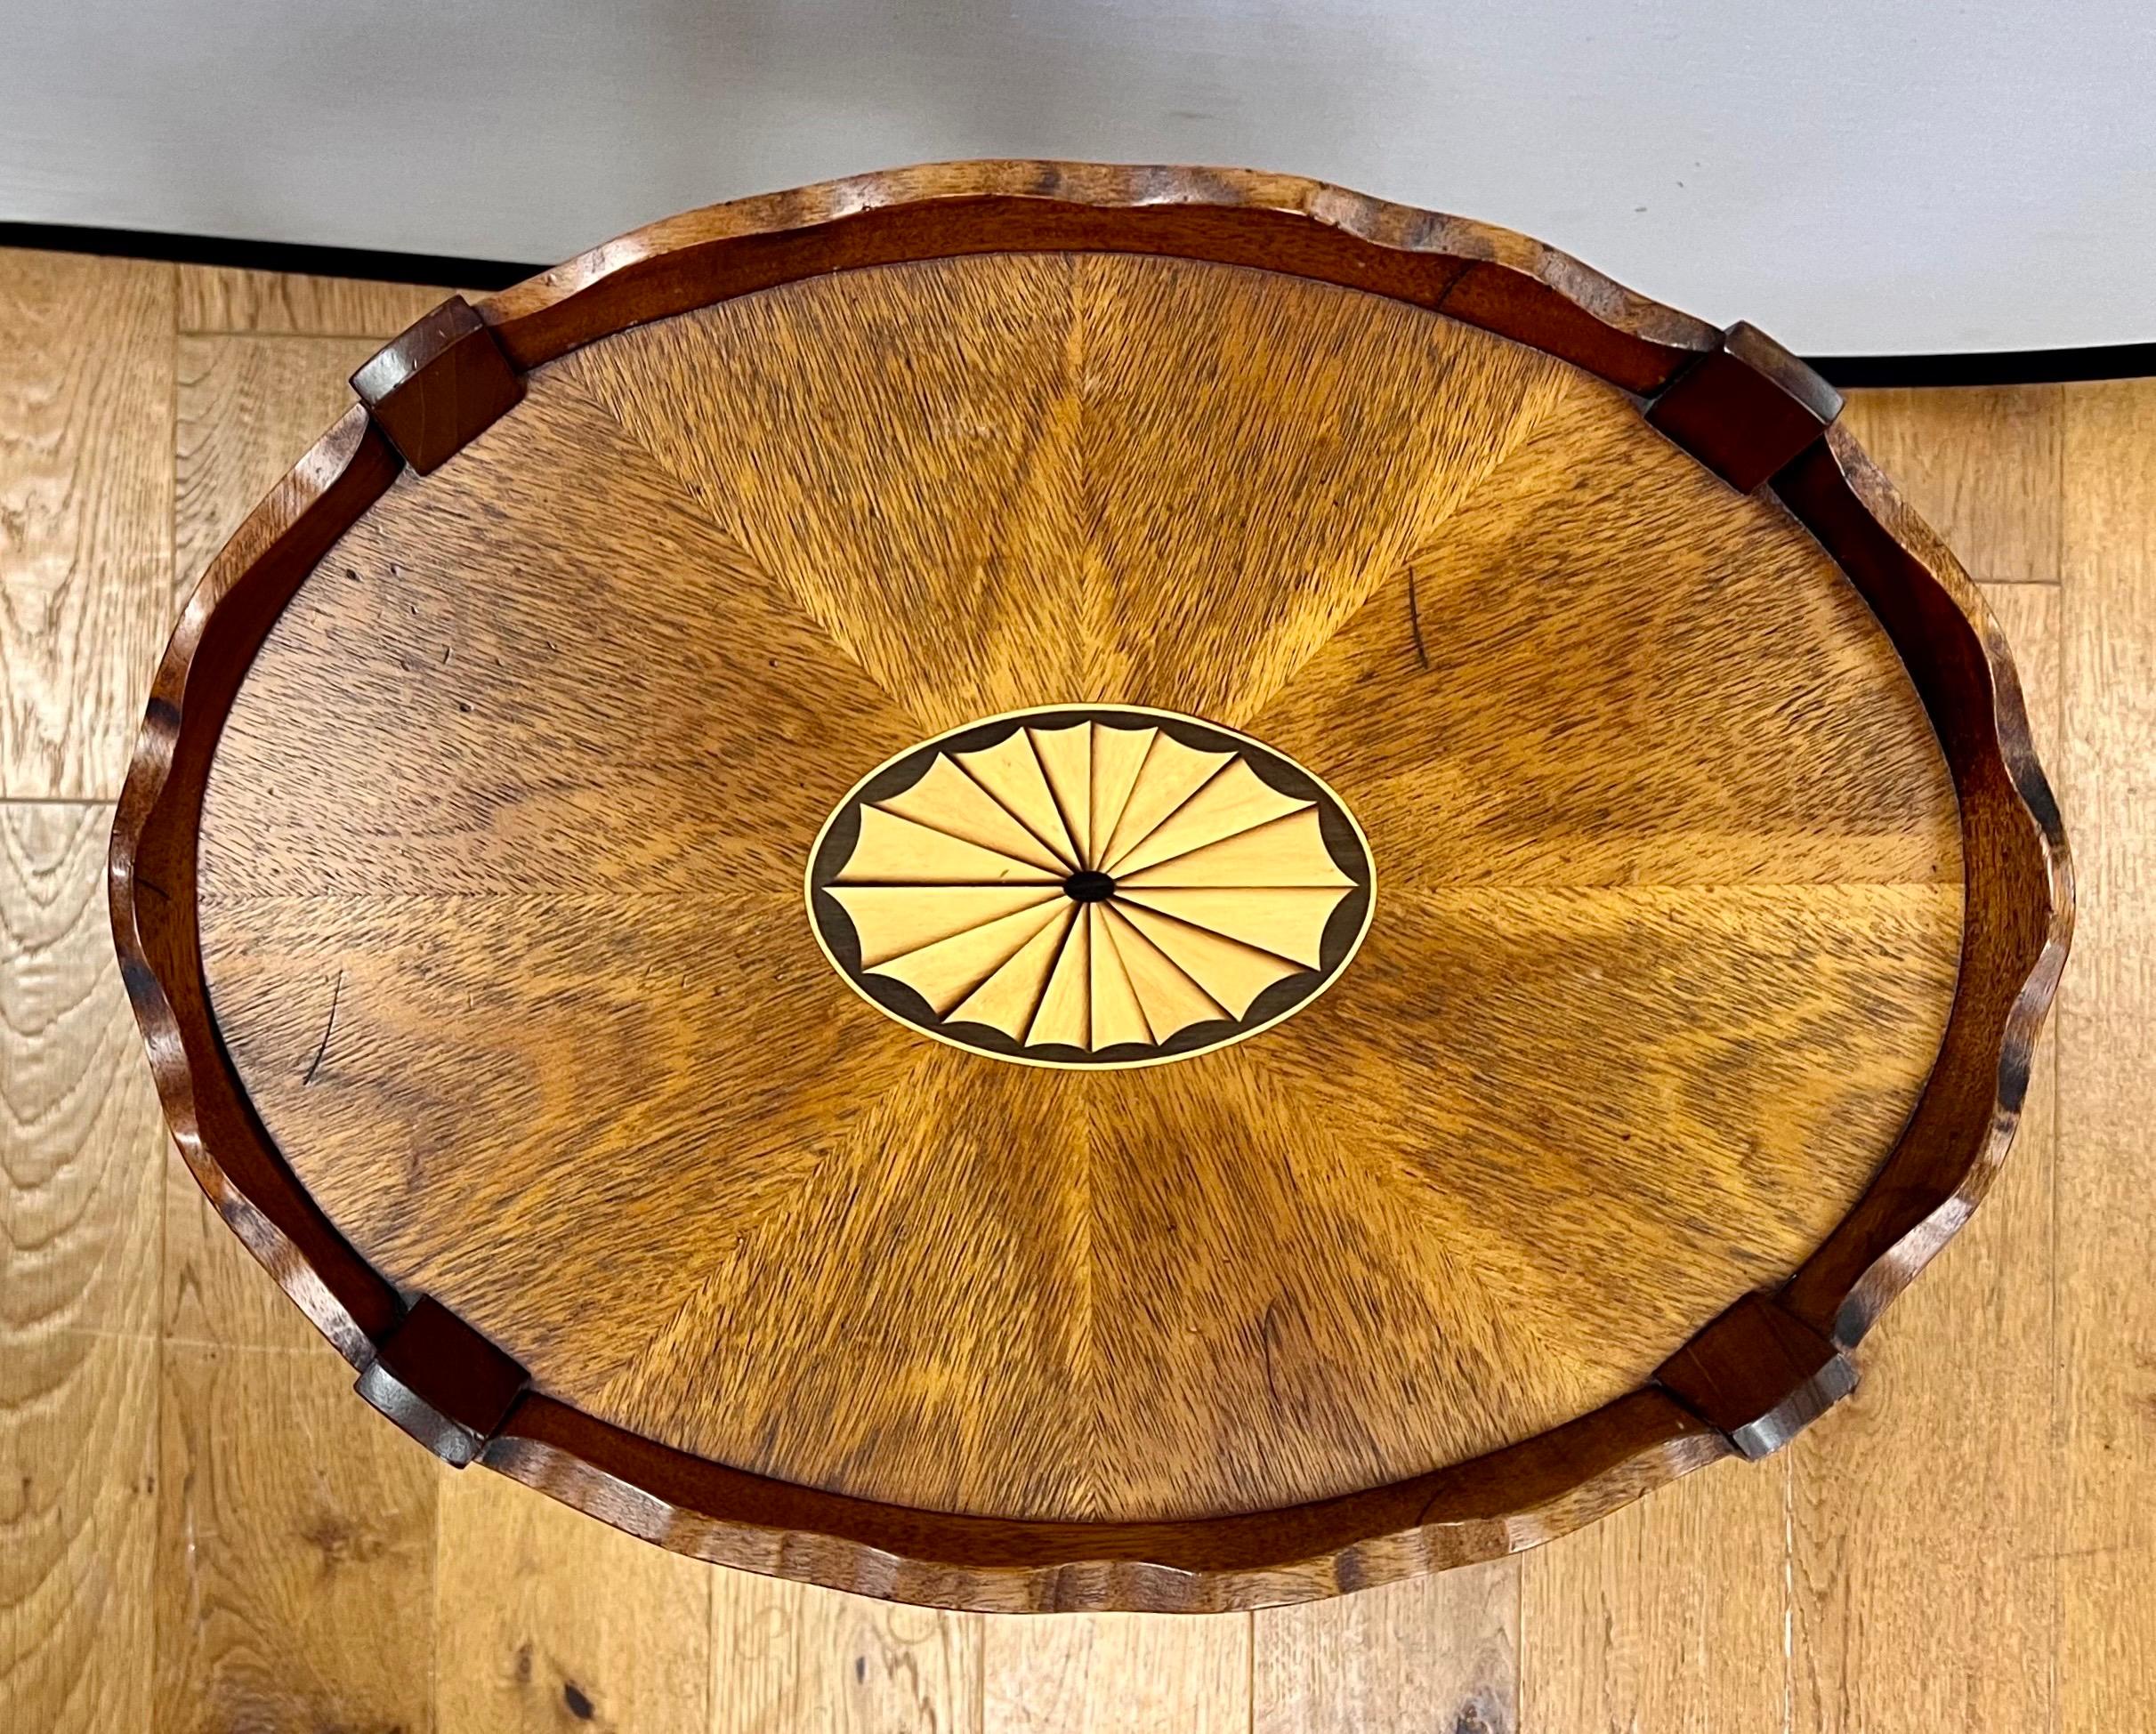 Stunning mahogany inlay table with scalloped edges.  Features oval inlay design in center and bellflower inlay on all four legs.  Rests on four brass castors for ease of movement.